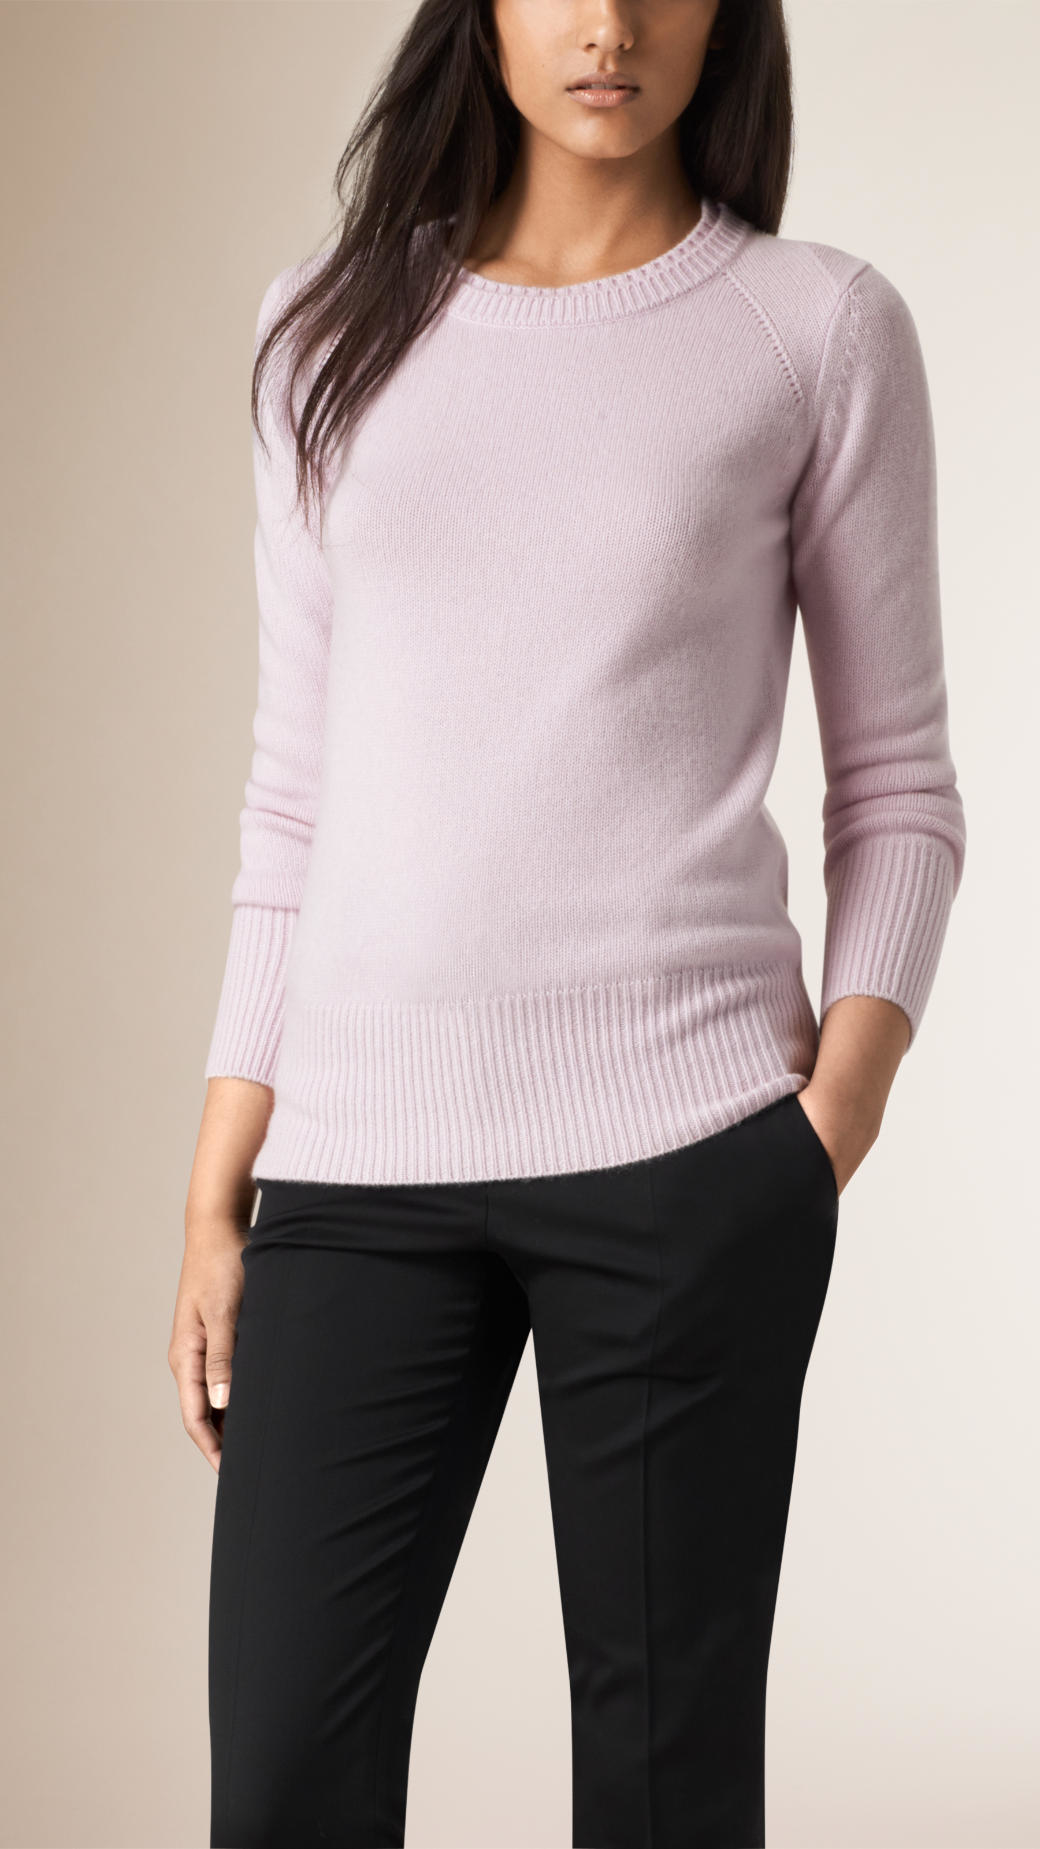 Lyst - Burberry Crew Neck Cashmere Sweater Pale Orchid in Purple